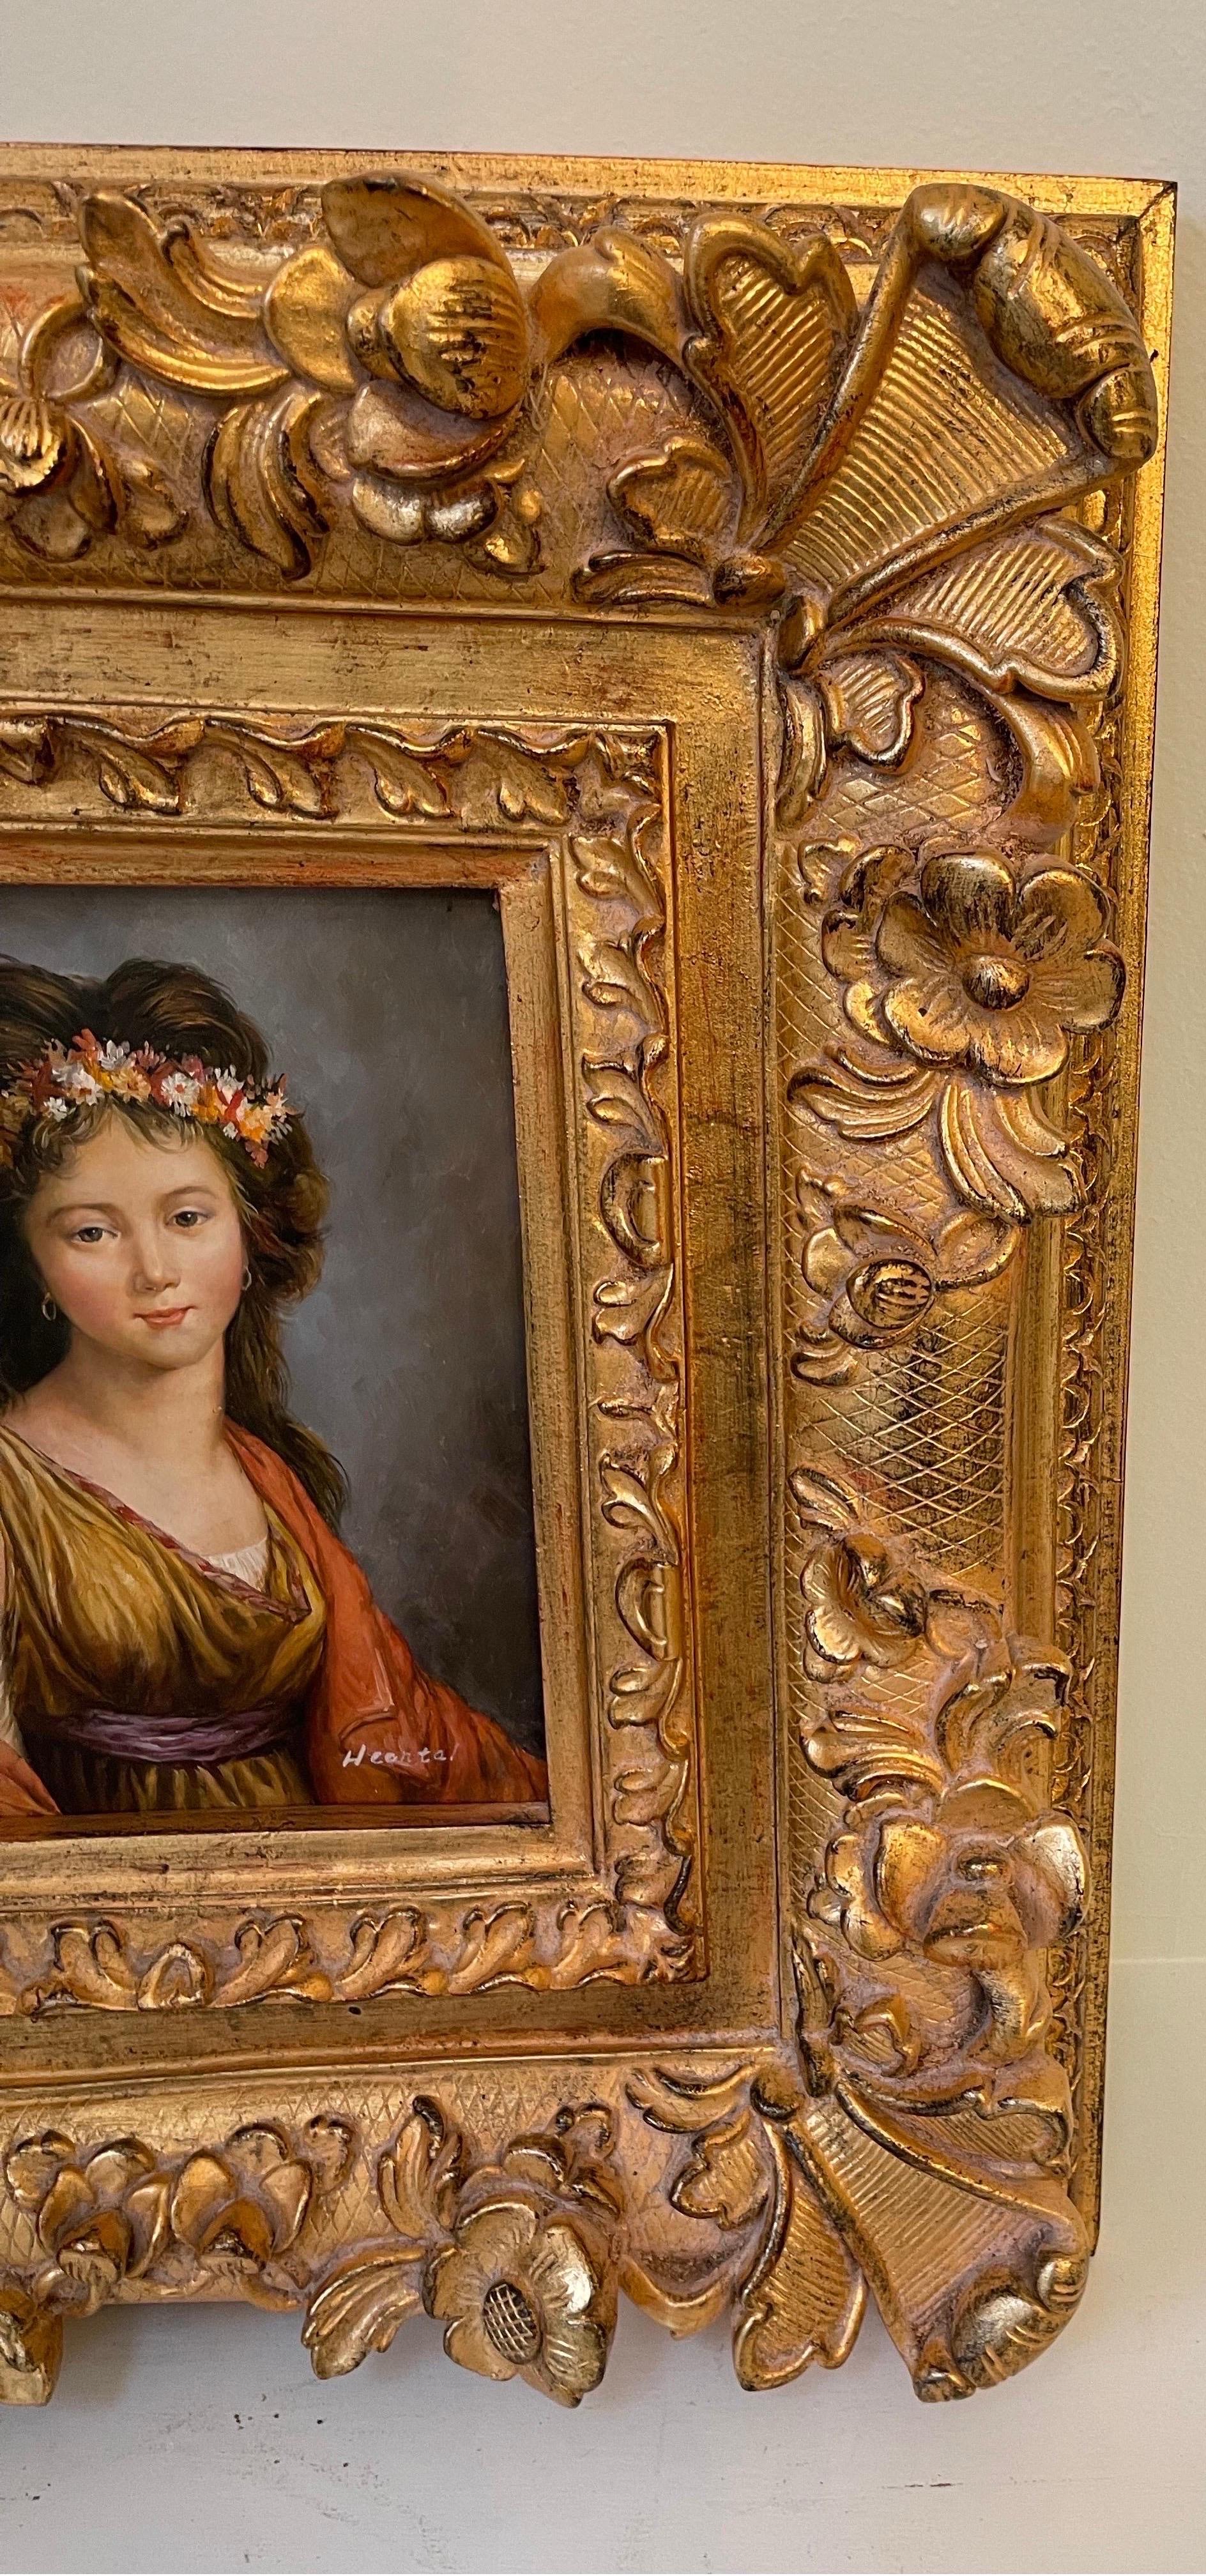 Original Oil Painting Portrait of Countess Kagenek, as Flora in Carved Frame In Good Condition For Sale In West Hartford, CT